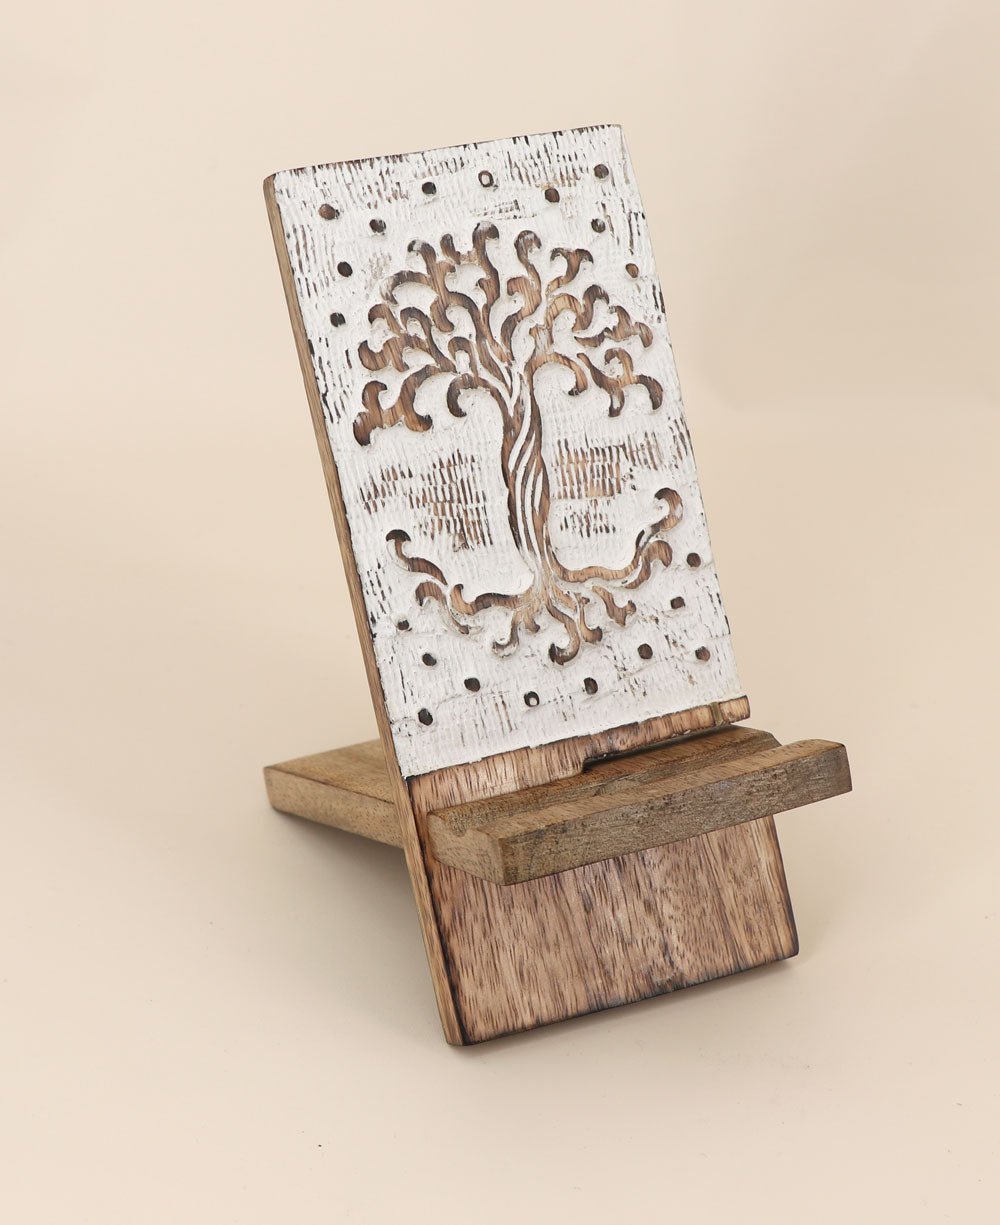 Fairtrade Tree of Life Phone Holder Charging Dock - Mobile Phone Stands